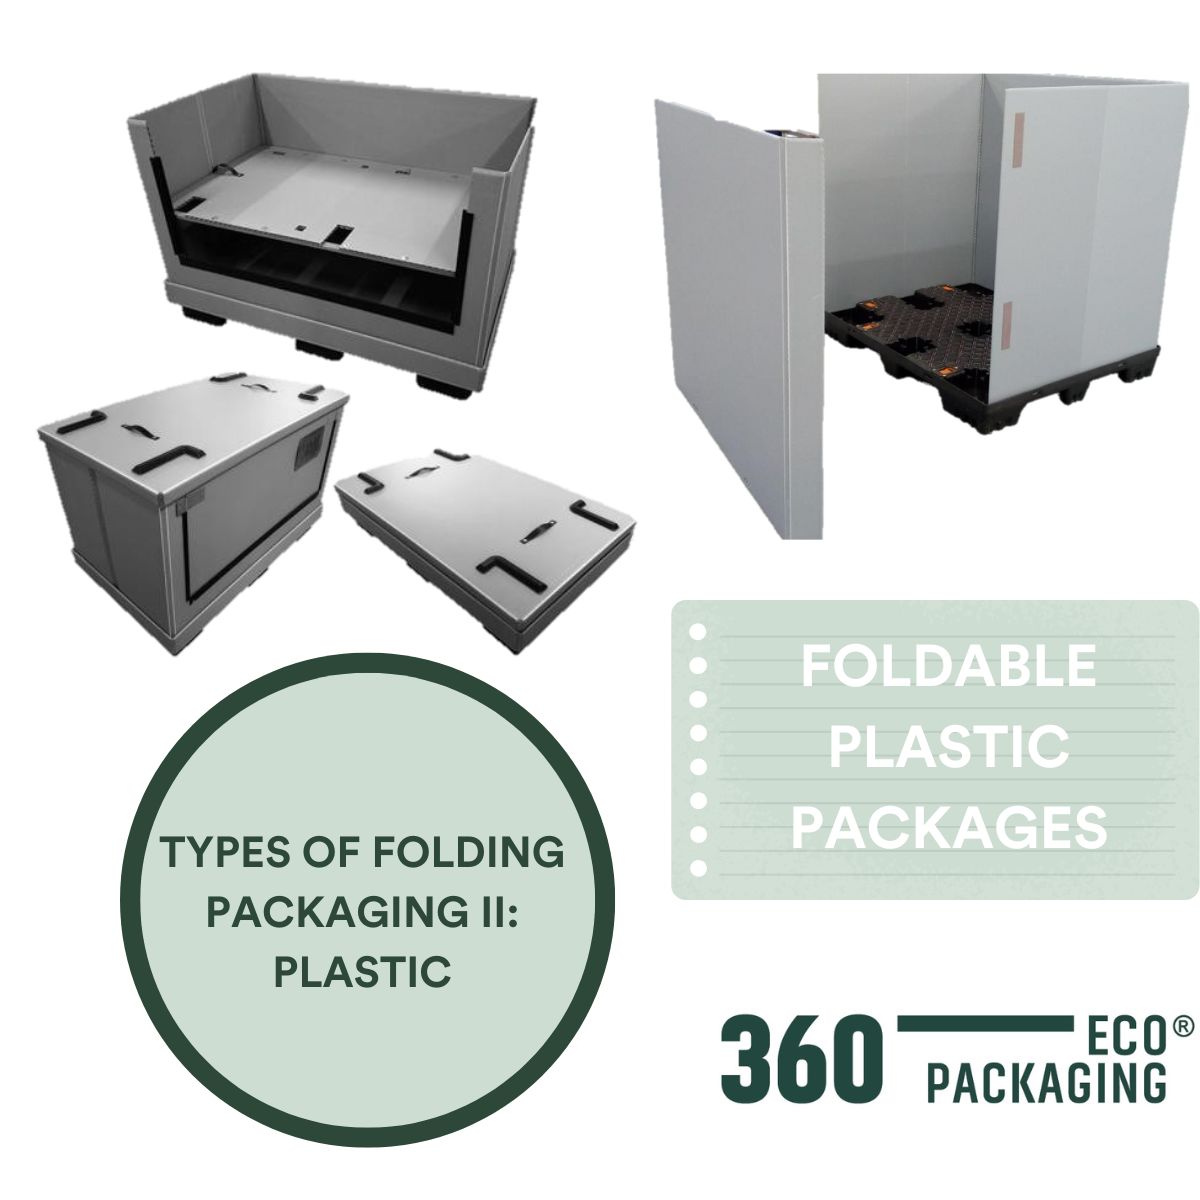 TYPES OF FOLDING PACKAGING PLASTIC